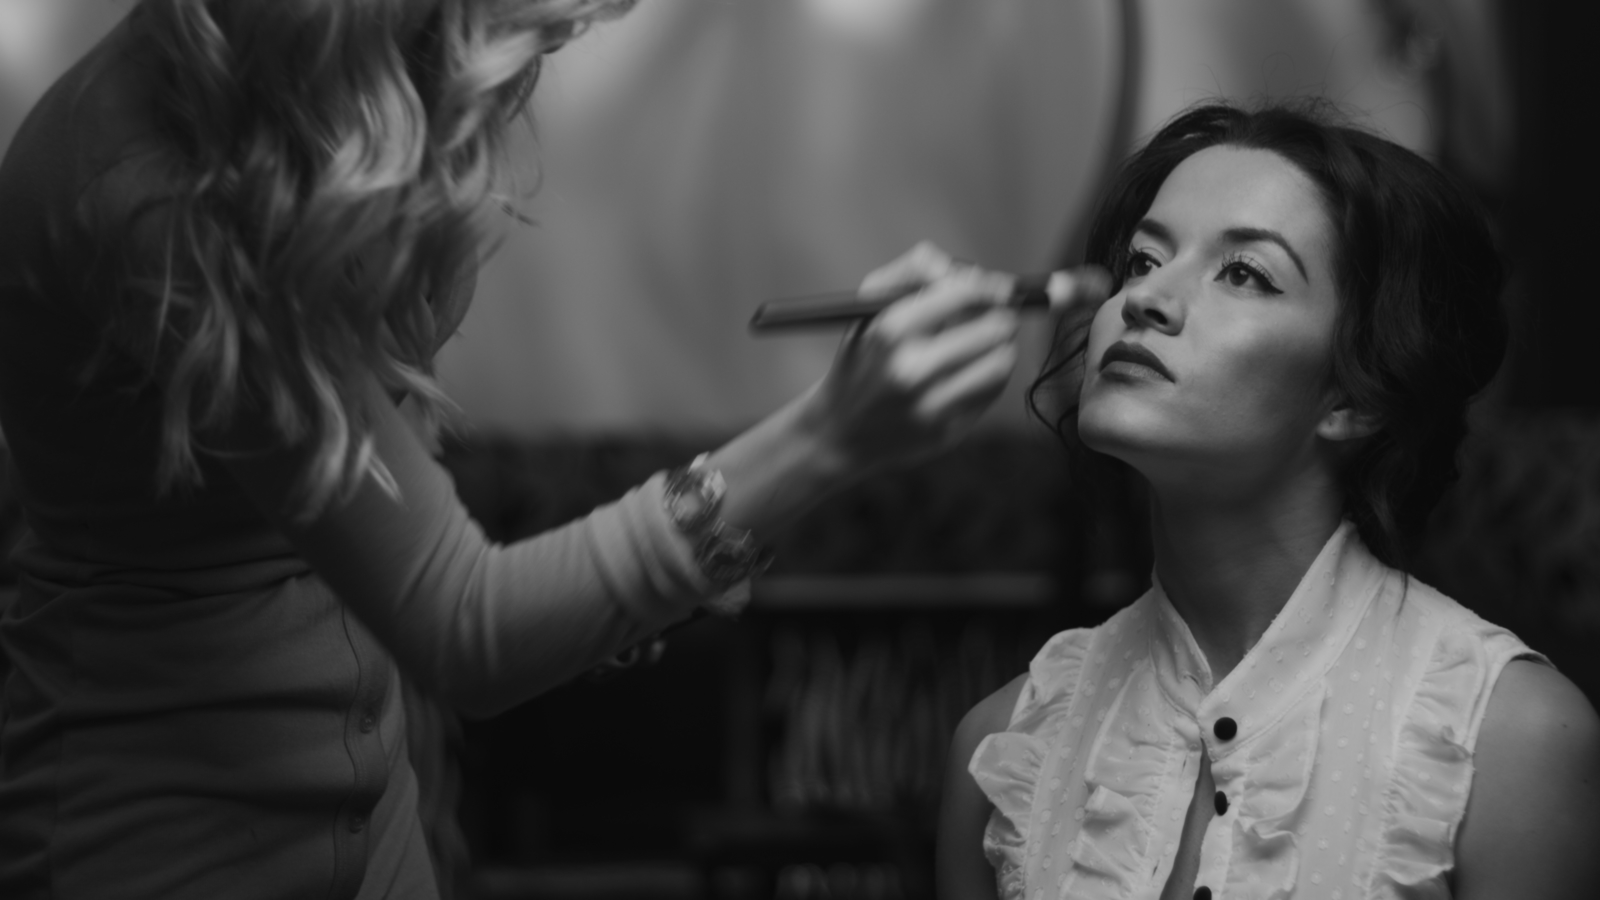 Black and white side profile of female makeup artist applying makeup to woman with long hair wearing a white dress top